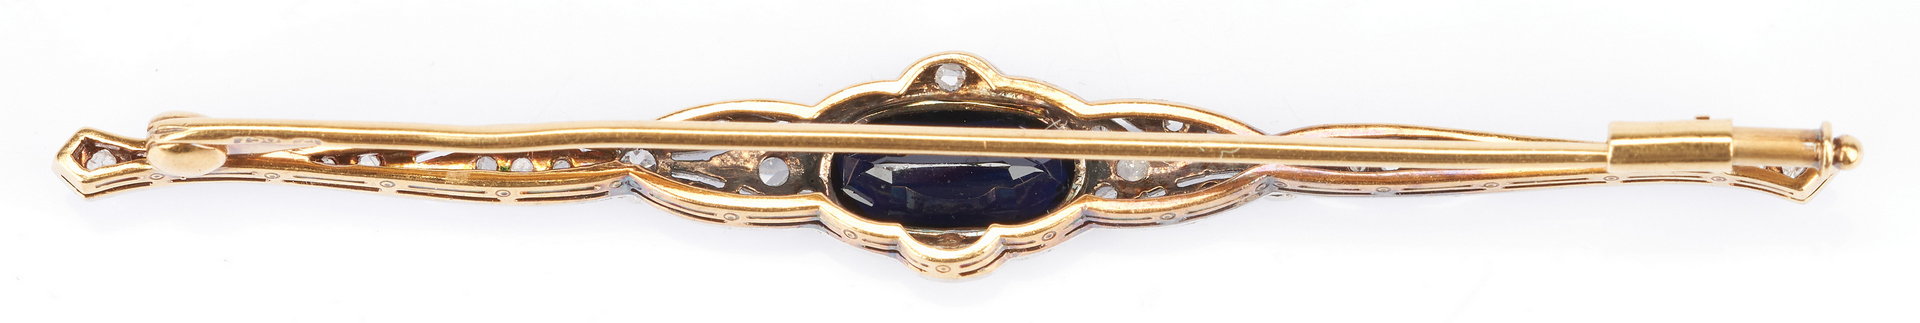 Lot 792: 2 Ladies Gold, Diamond, and Gemstone Brooches